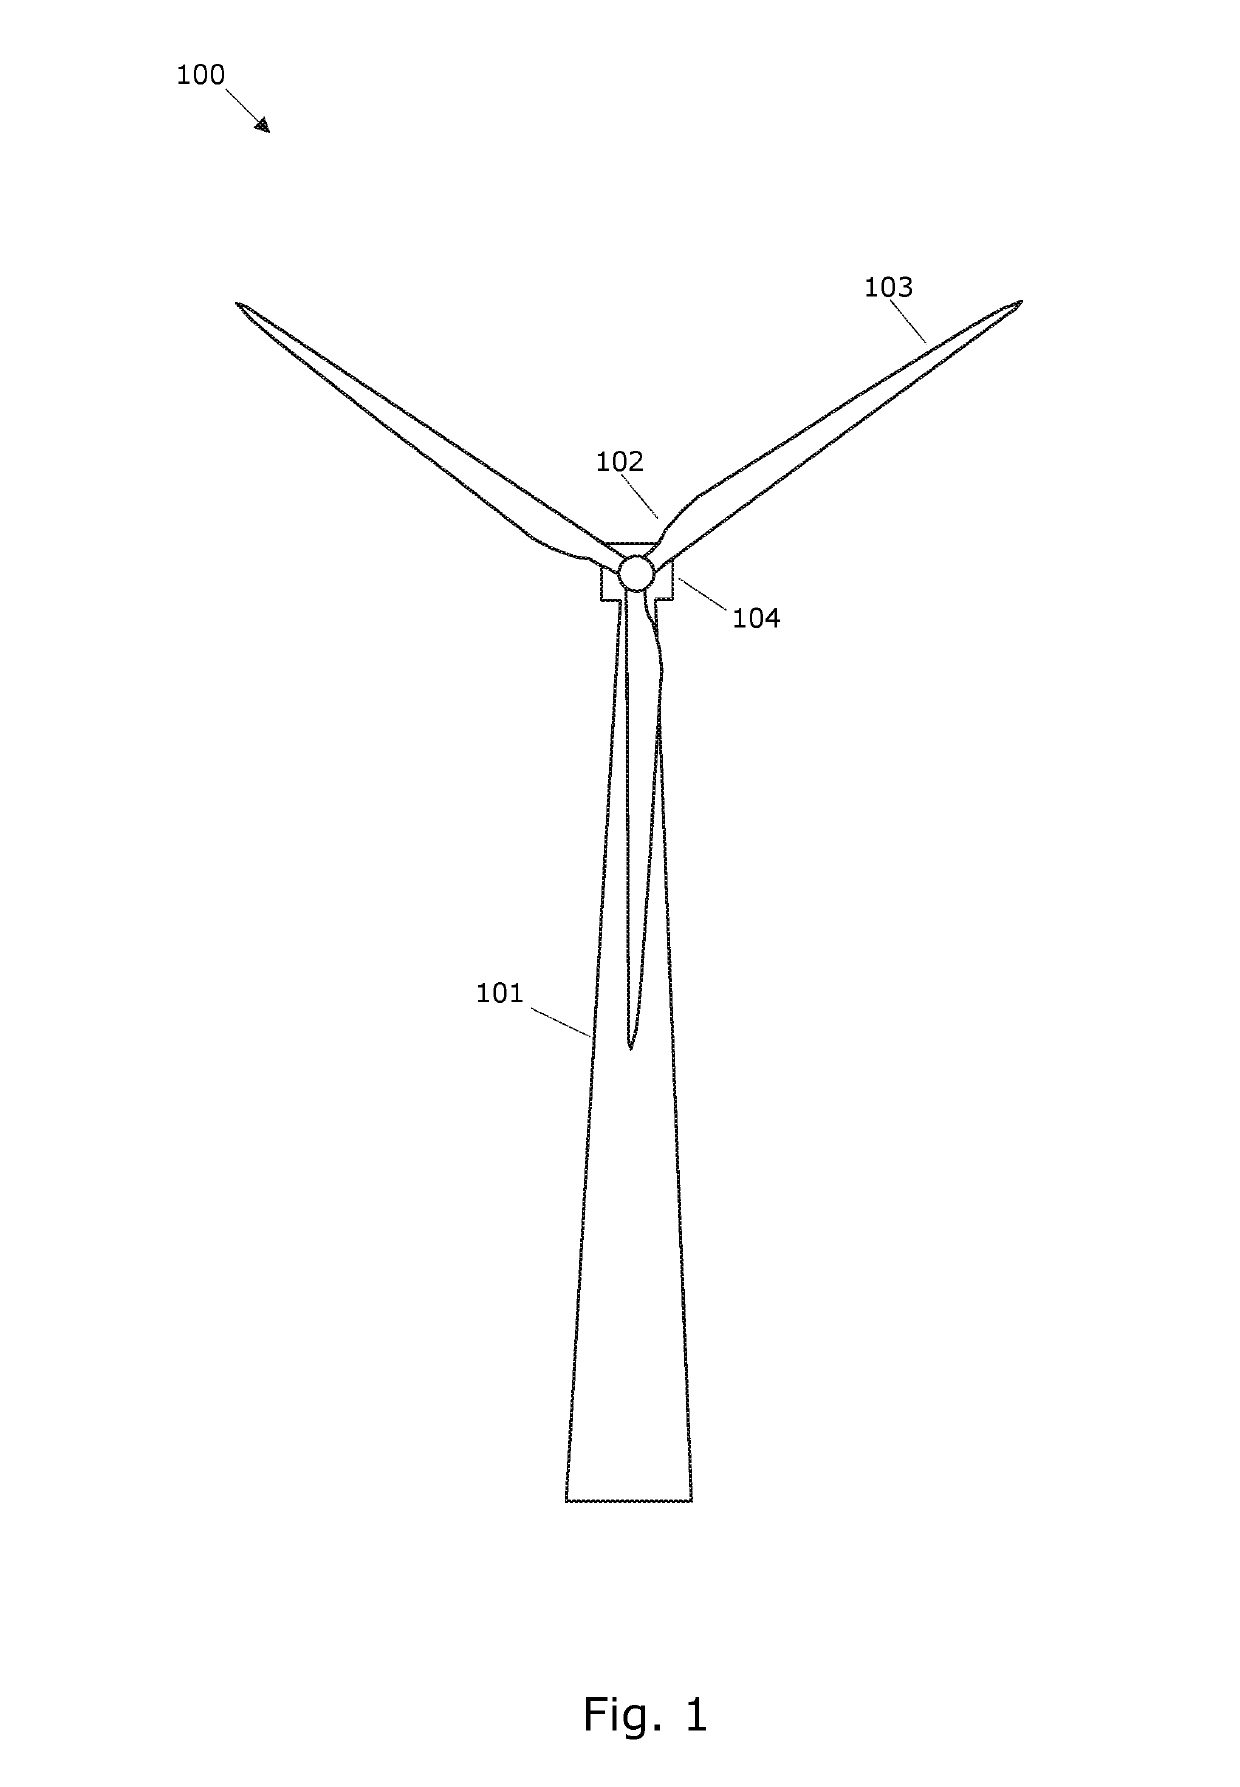 Ramping power in a wind turbine dependent on an estimated available wind power